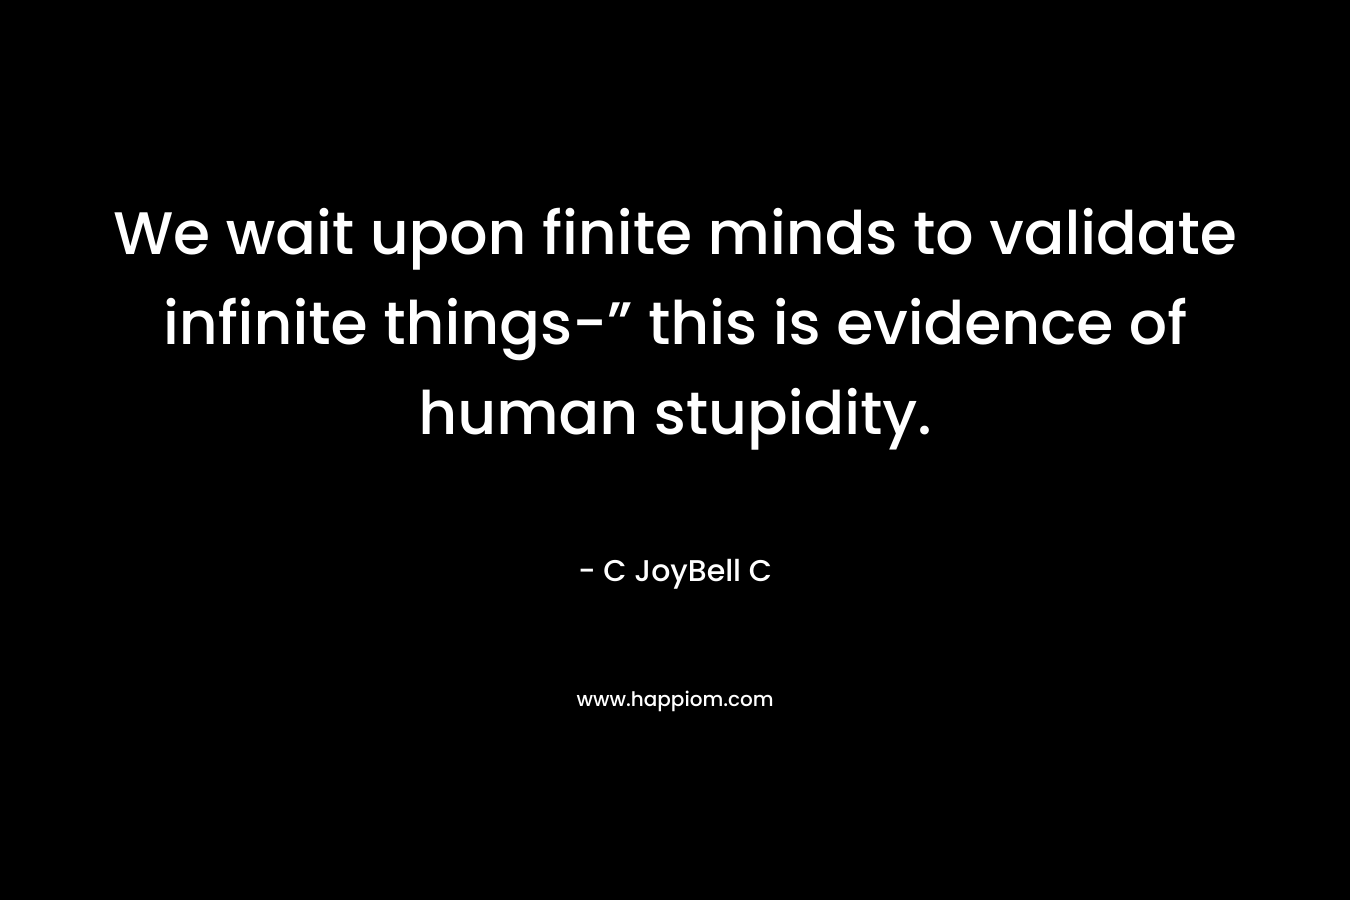 We wait upon finite minds to validate infinite things-” this is evidence of human stupidity.